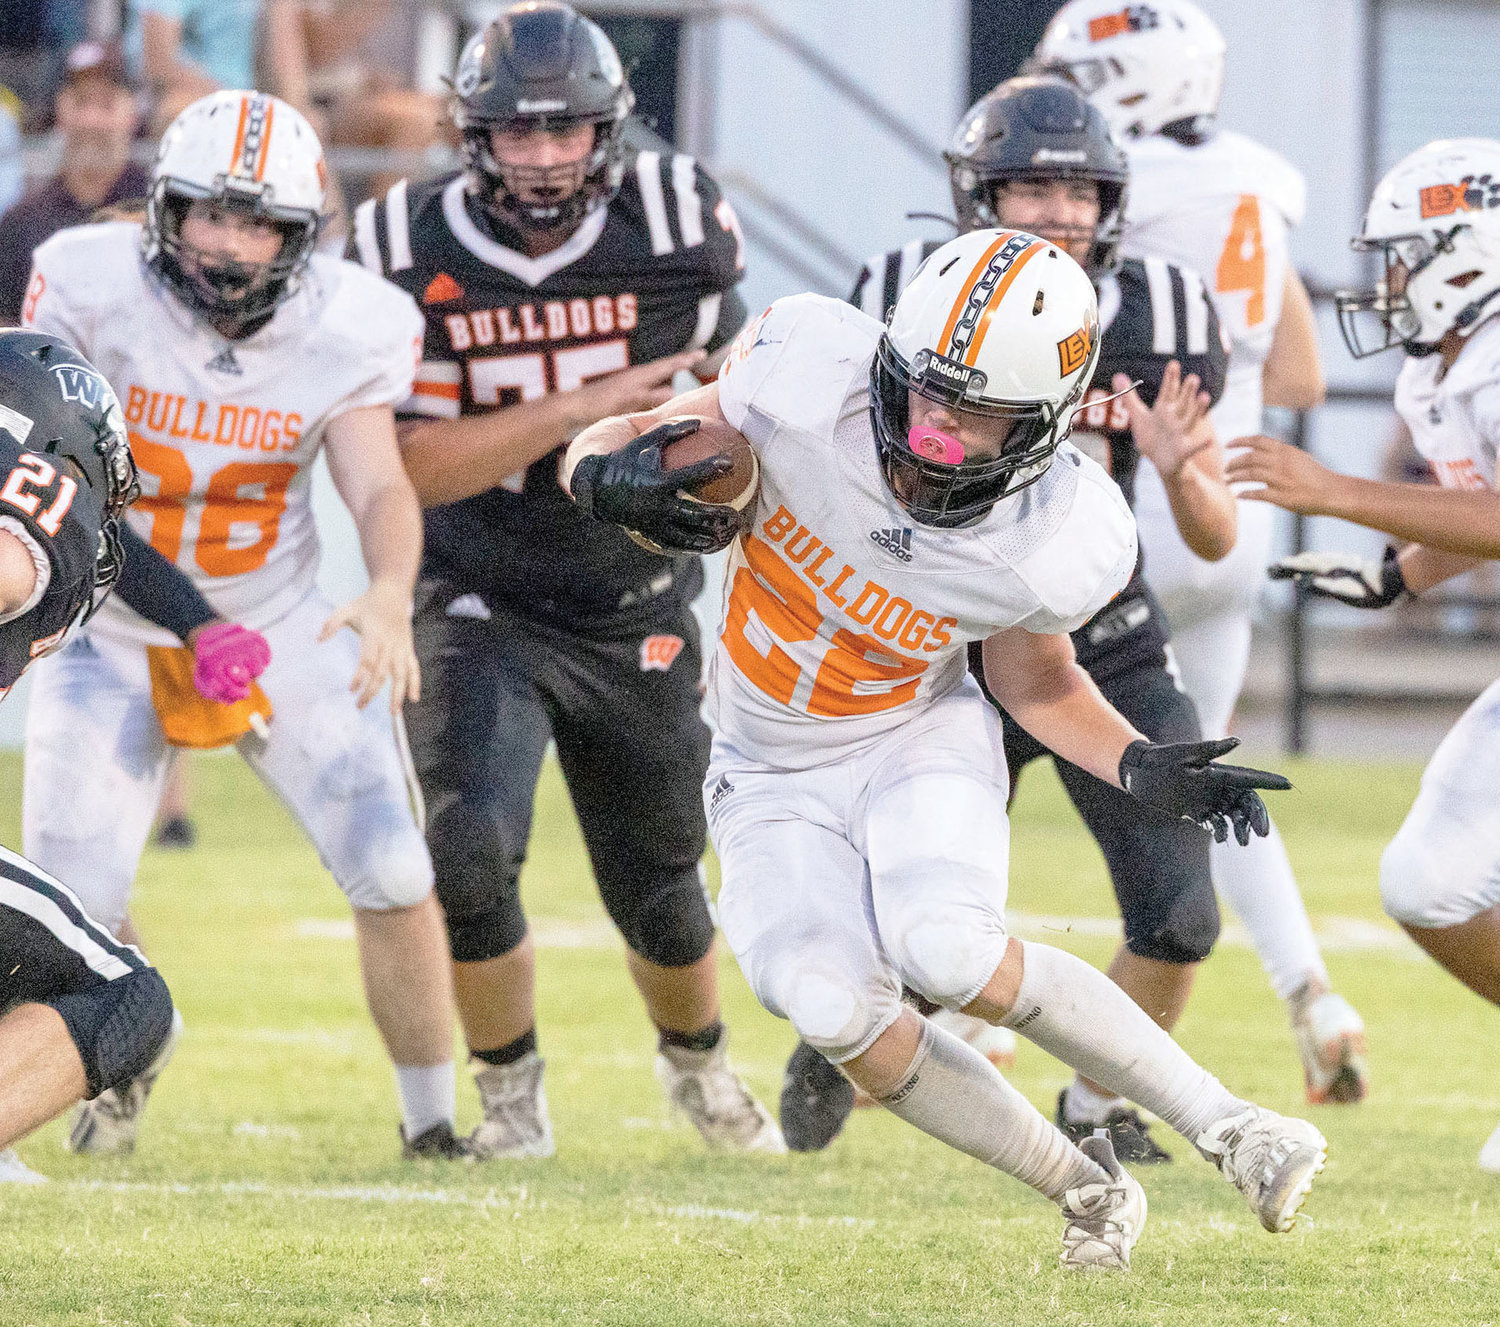 Lexington sophomore Dalton Brewer (22) puts a move on a Wayne defender while carrying the ball Friday night. Lexington was defeated 55-16. Brewer had one of Lexington’s two scores when he took the ball 16 yards to the house in the 1st quarter.